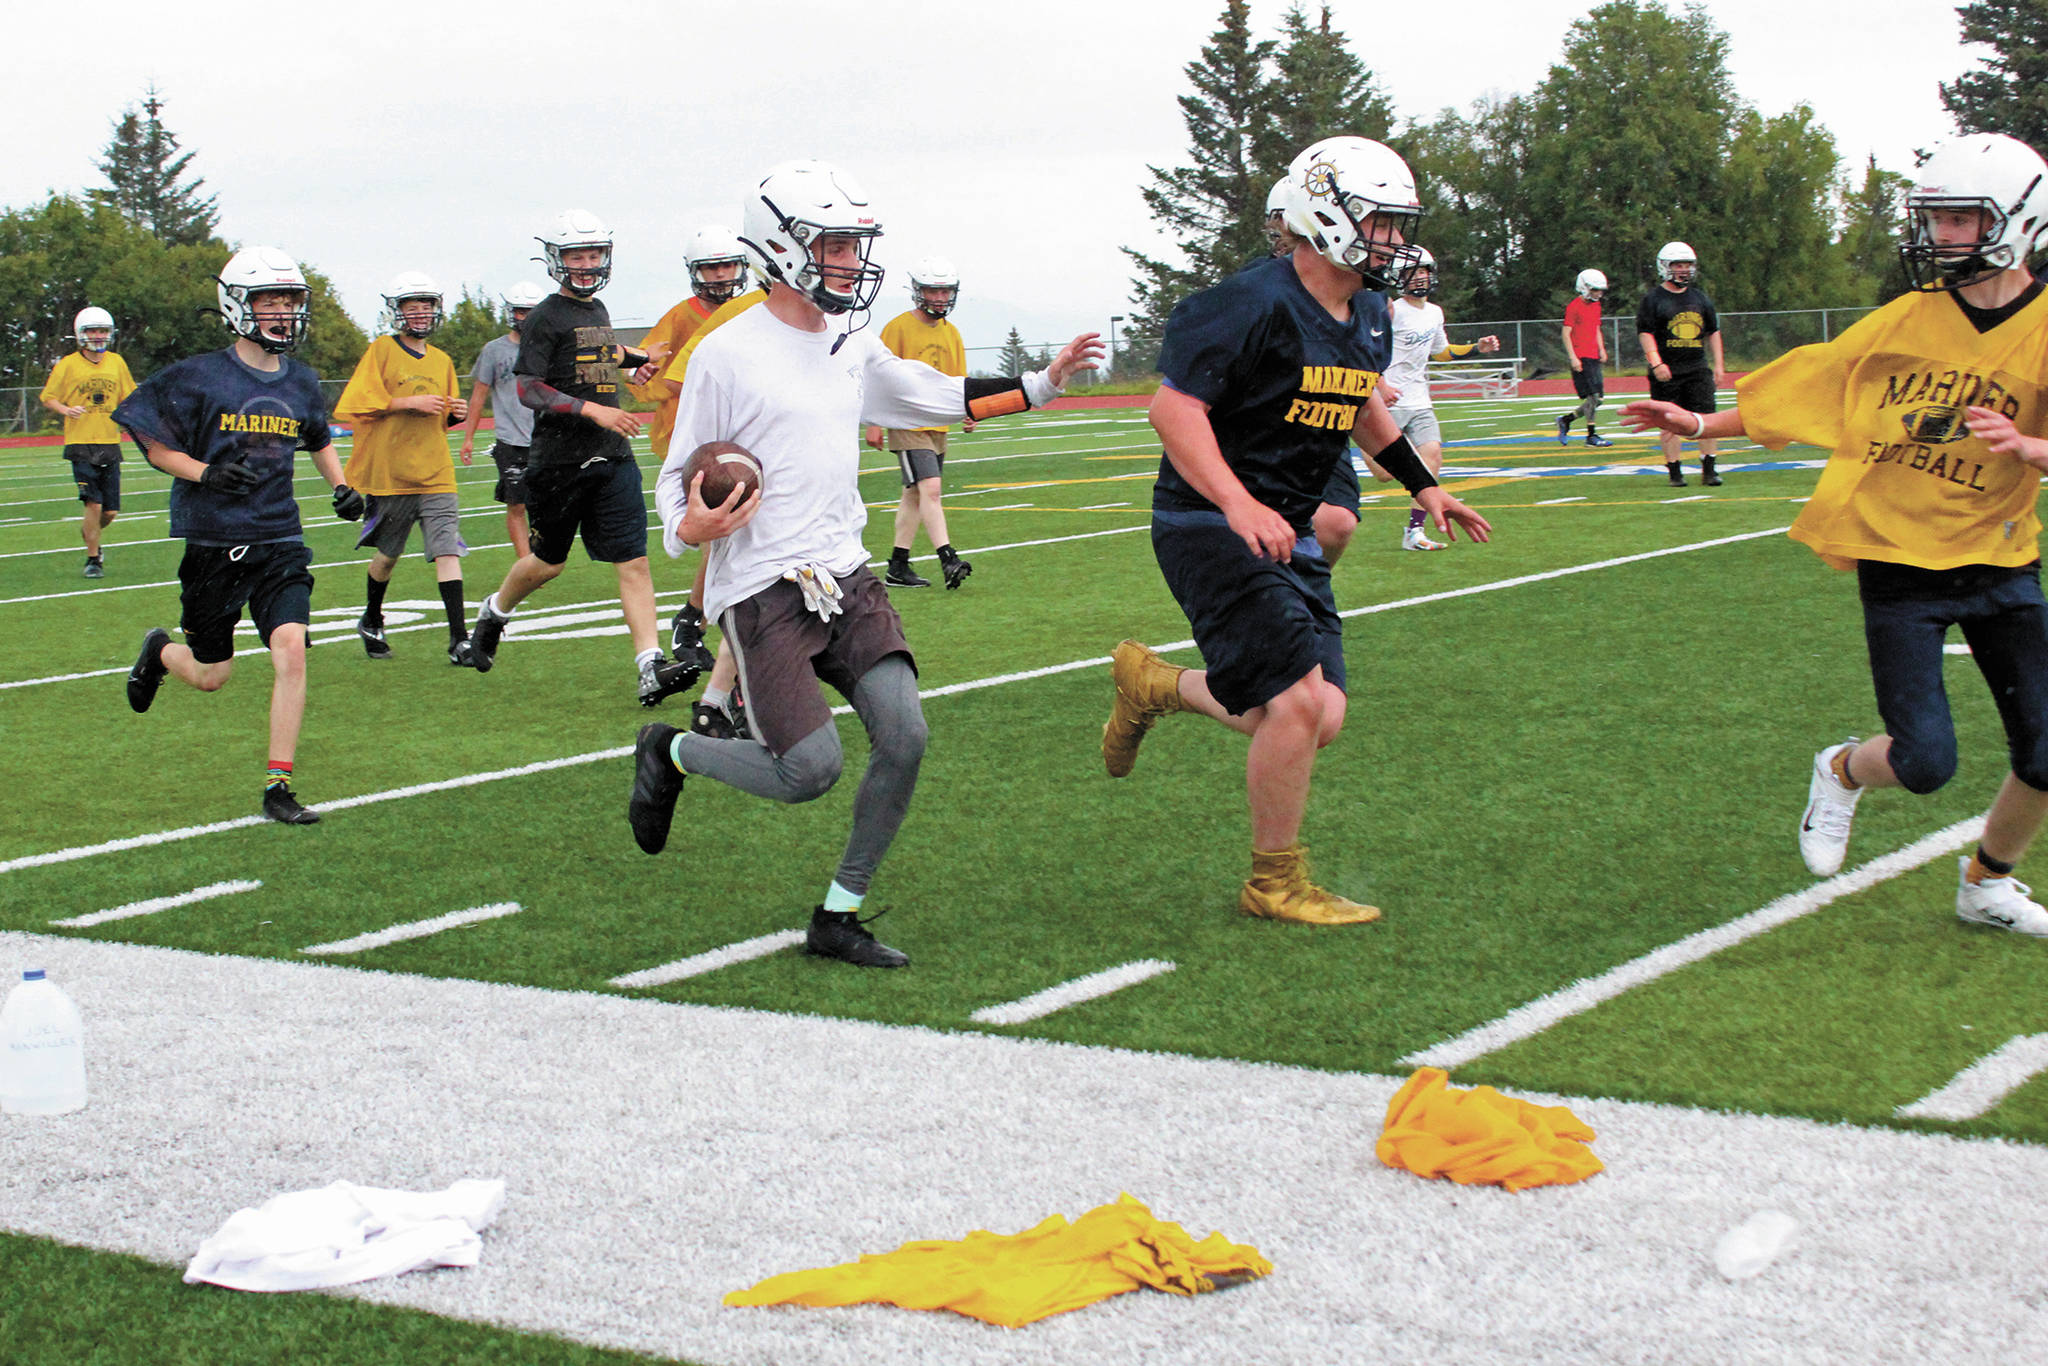 Members of the Homer Mariners football team practice outside on the turf field on Tuesday, Aug. 18, 2020 at Homer High School in Homer, Alaska. (Photo by Megan Pacer/Homer News)